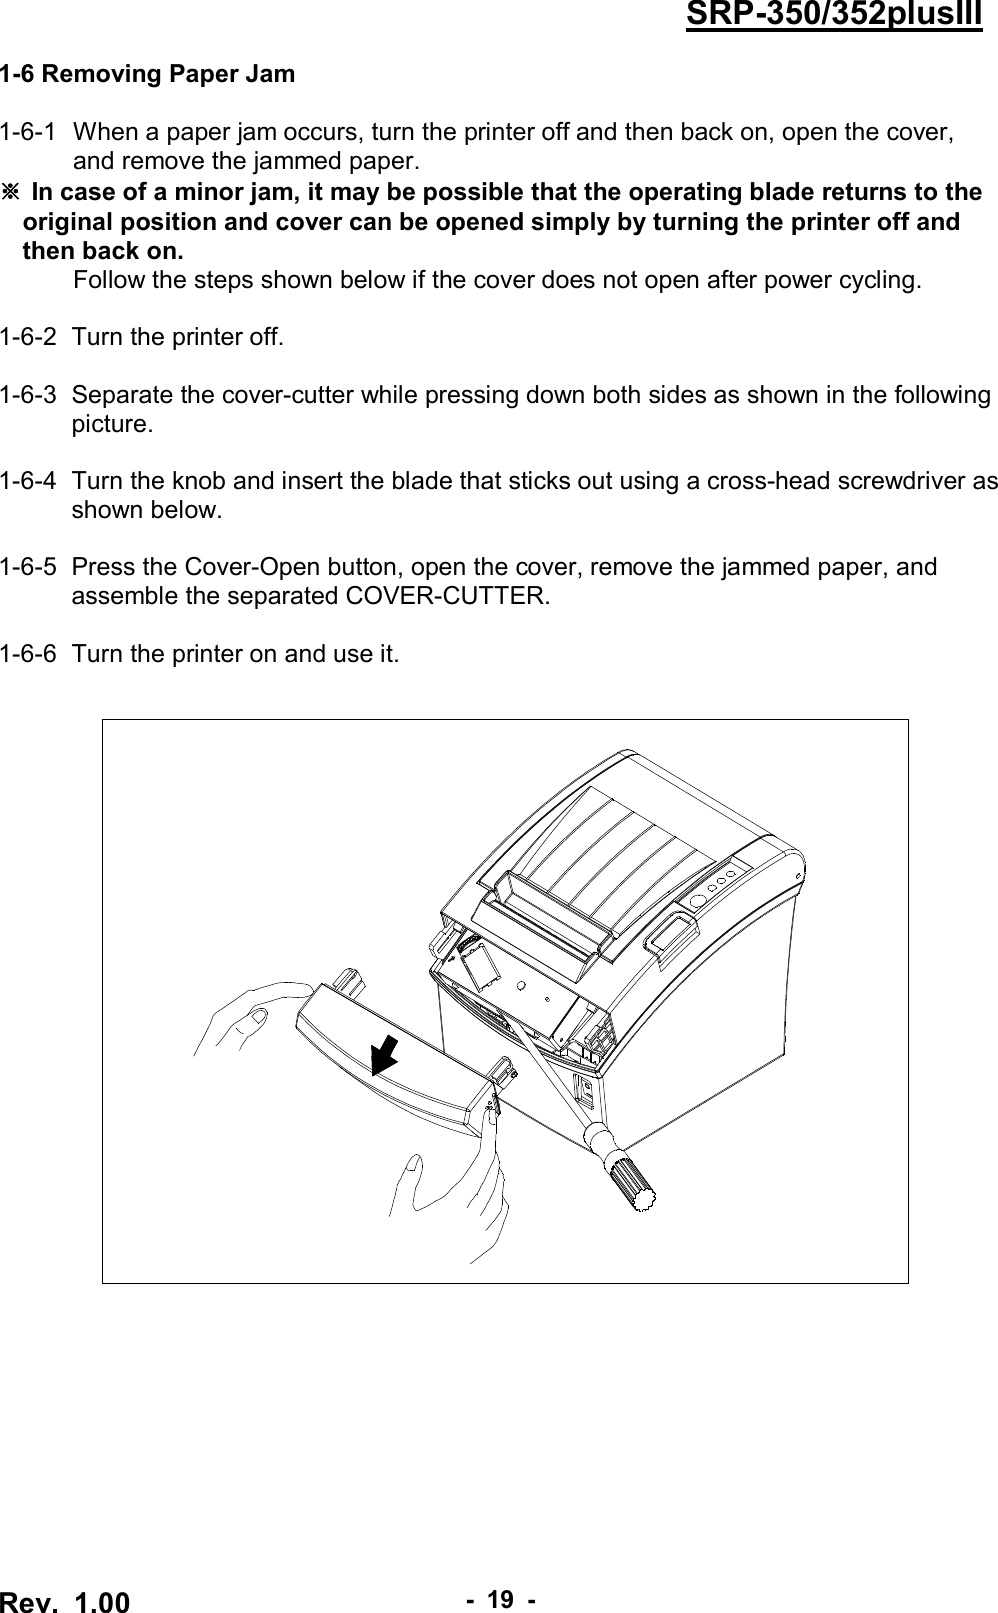  Rev.  1.00 - 19 - SRP-350/352plusIII 1-6 Removing Paper Jam  1-6-1   When a paper jam occurs, turn the printer off and then back on, open the cover, and remove the jammed paper. ※ In case of a minor jam, it may be possible that the operating blade returns to the original position and cover can be opened simply by turning the printer off and then back on. Follow the steps shown below if the cover does not open after power cycling.  1-6-2  Turn the printer off.  1-6-3   Separate the cover-cutter while pressing down both sides as shown in the following picture.  1-6-4   Turn the knob and insert the blade that sticks out using a cross-head screwdriver as shown below.  1-6-5   Press the Cover-Open button, open the cover, remove the jammed paper, and assemble the separated COVER-CUTTER.  1-6-6   Turn the printer on and use it.   